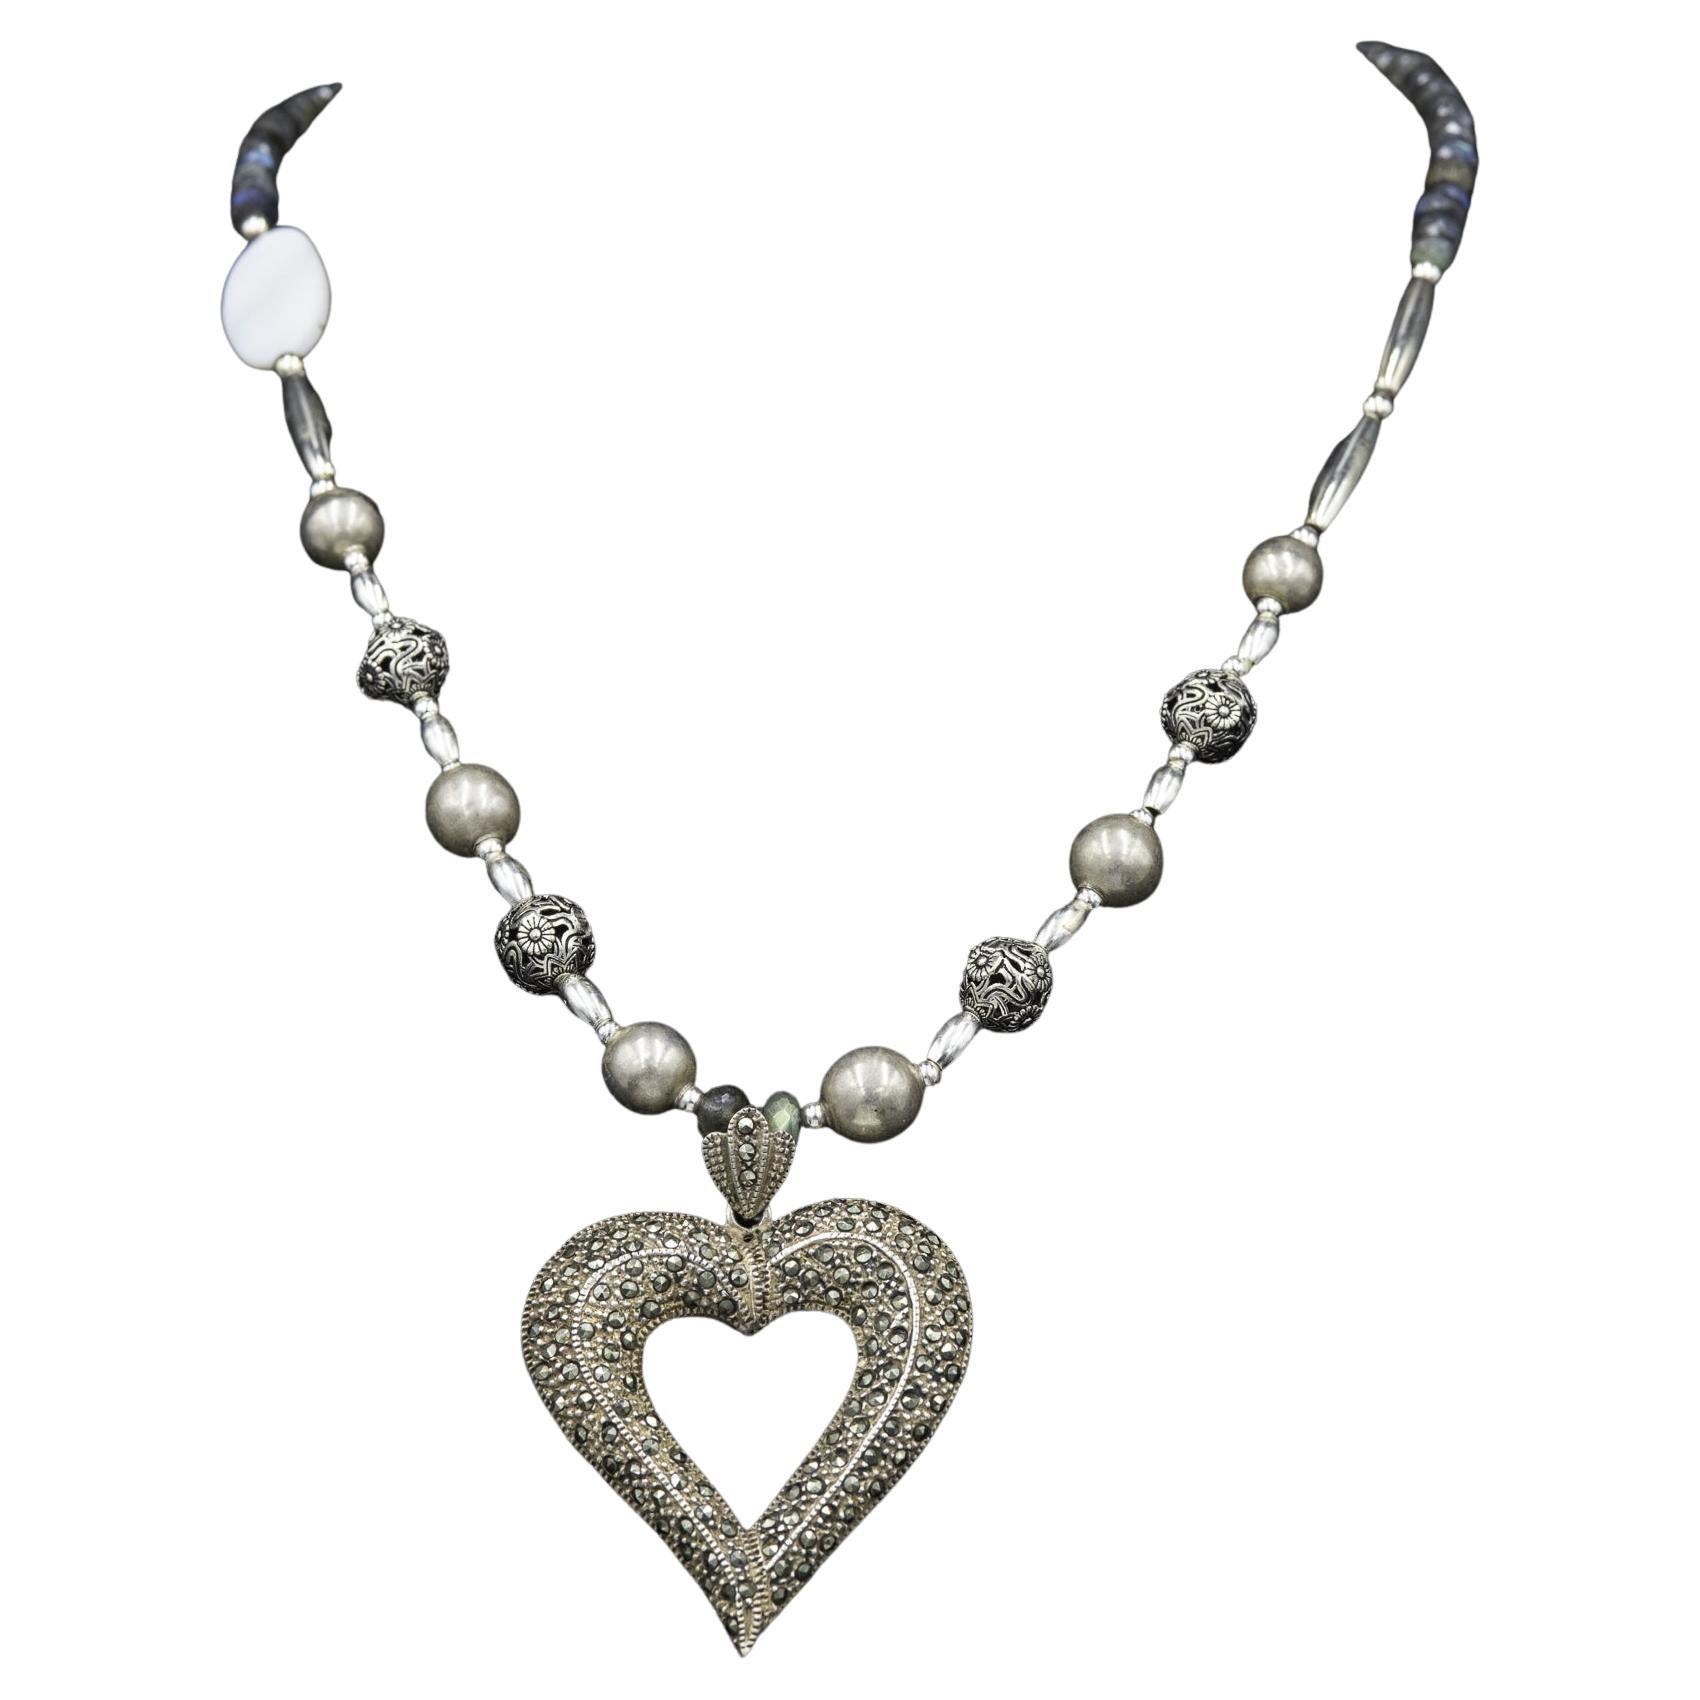 Vintage sterling/marcasite heart pendant on sterling beads handmade piece fromLB